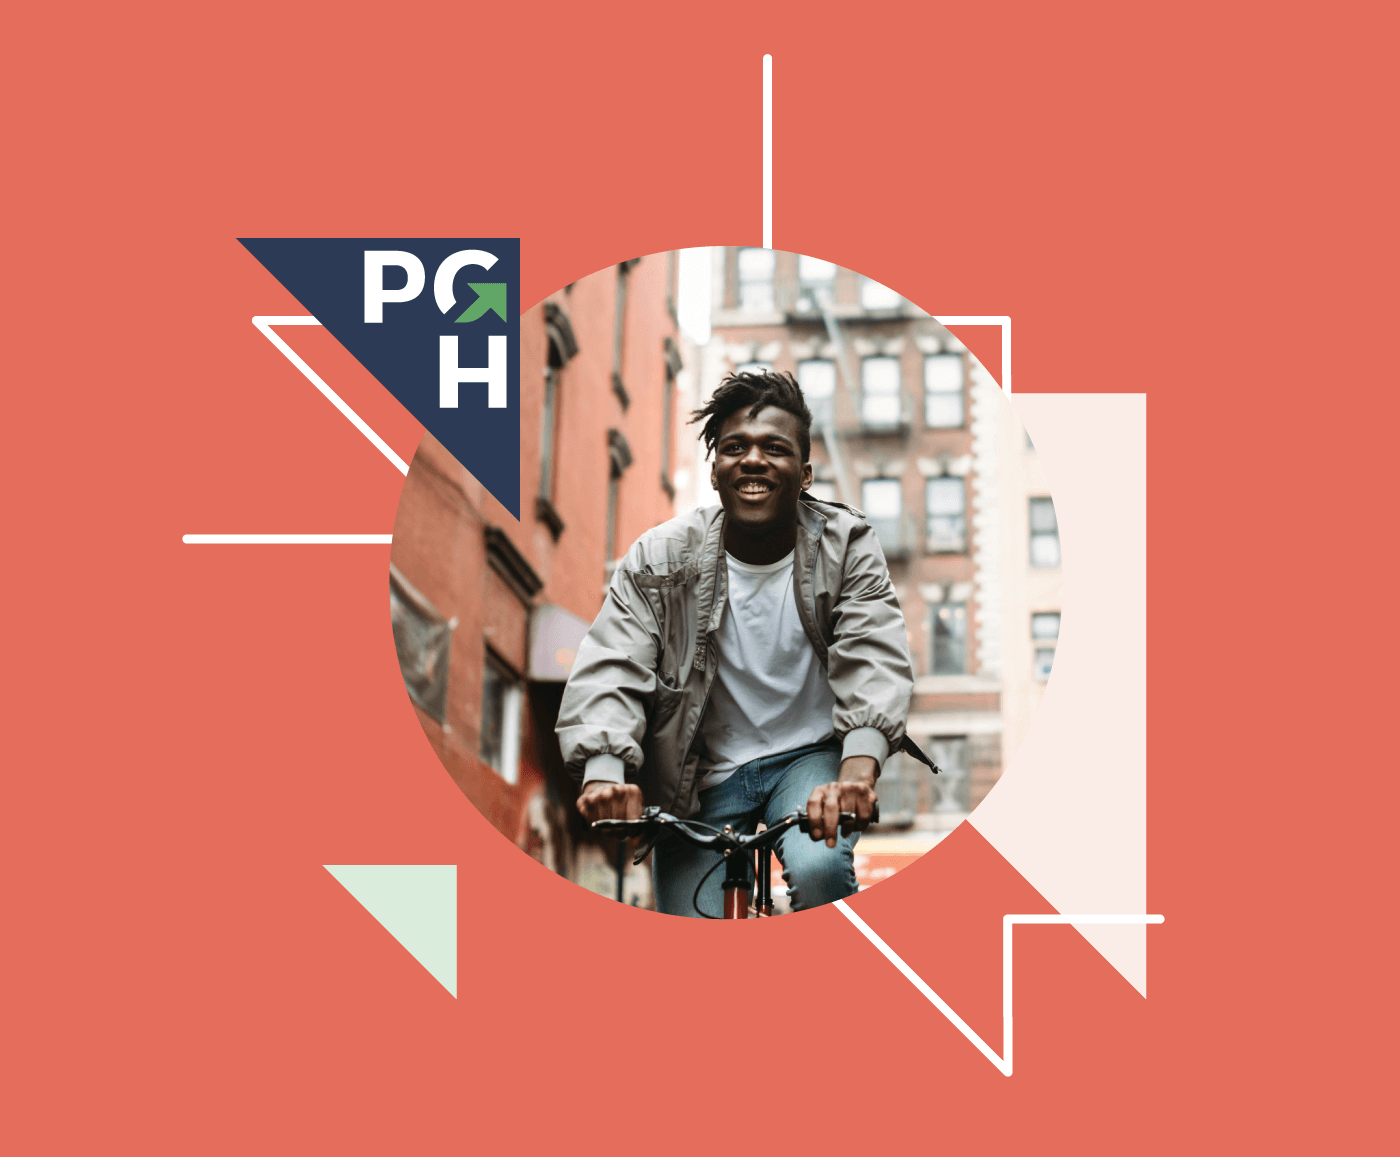 A PGH logo surrounded by branded graphics and an image of a person riding their bike downtown.